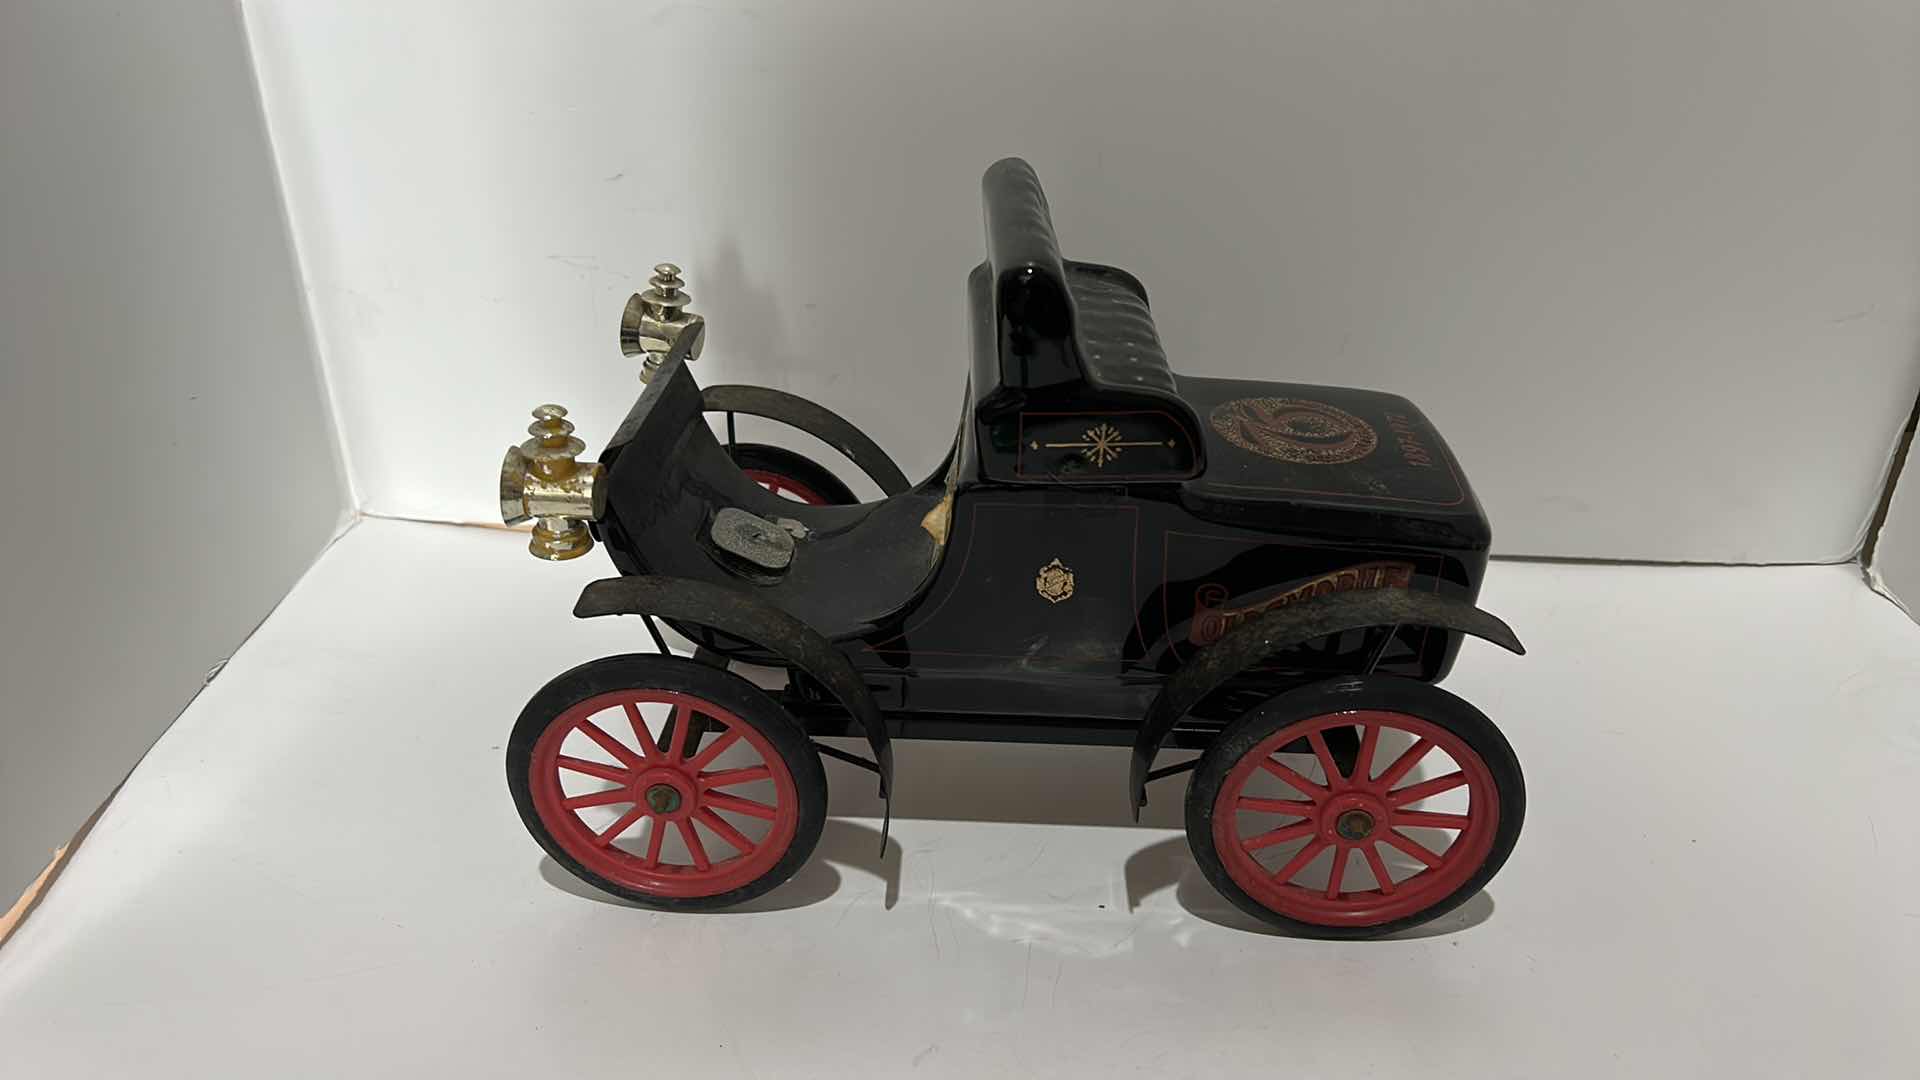 Photo 7 of COLLECTIBLE LIQUOR BOTTLES FIRE TRUCK MEASURES 17“ x 6 1/2“ x 7“